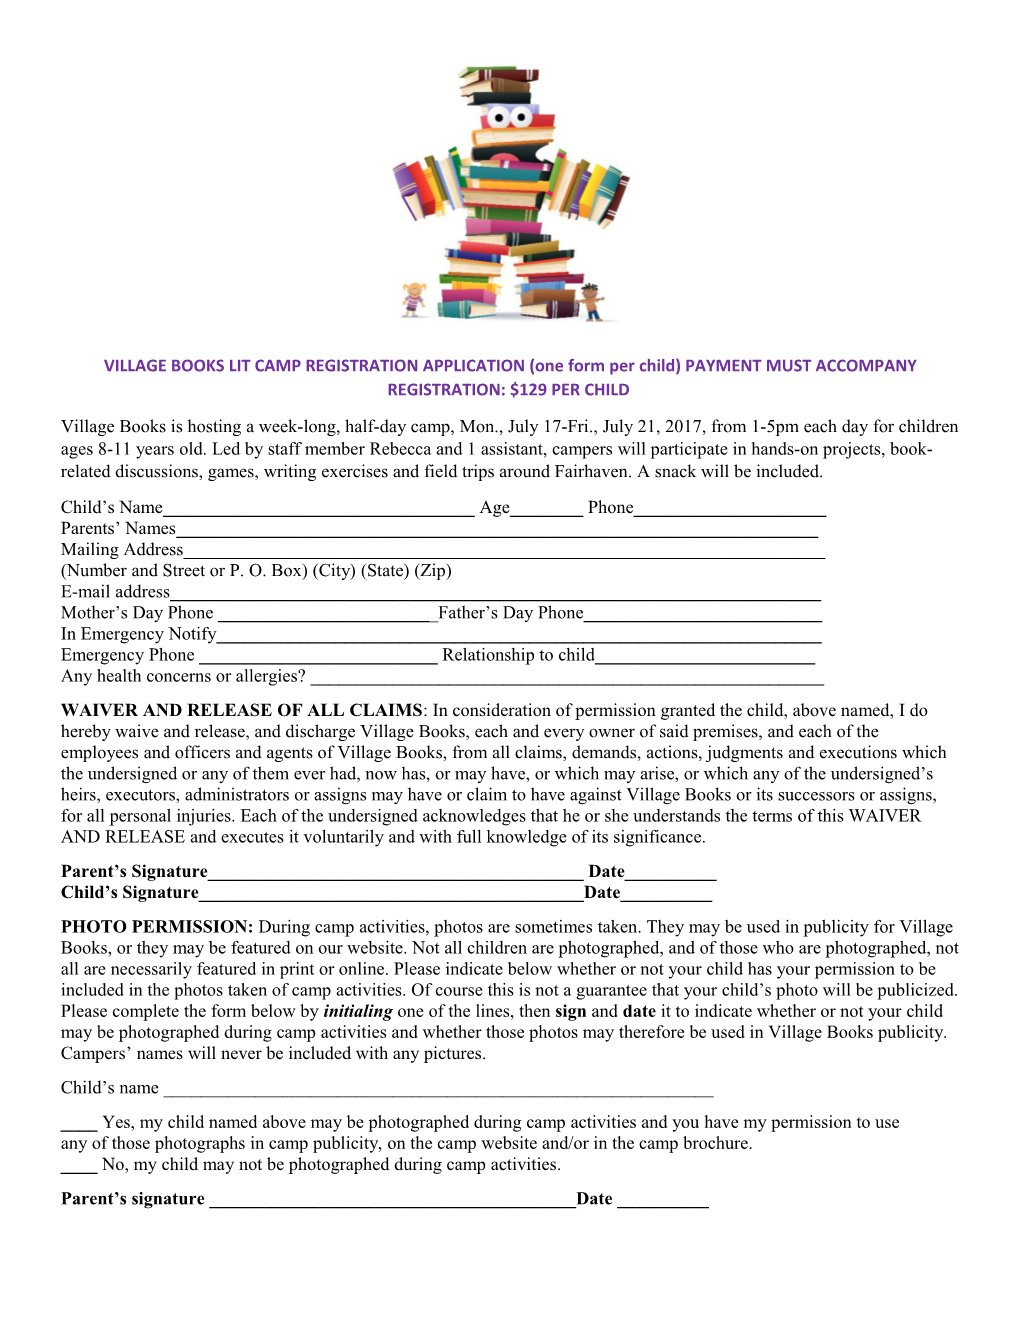 VILLAGE BOOKS LIT CAMP REGISTRATION APPLICATION (One Form Per Child) PAYMENT MUST ACCOMPANY